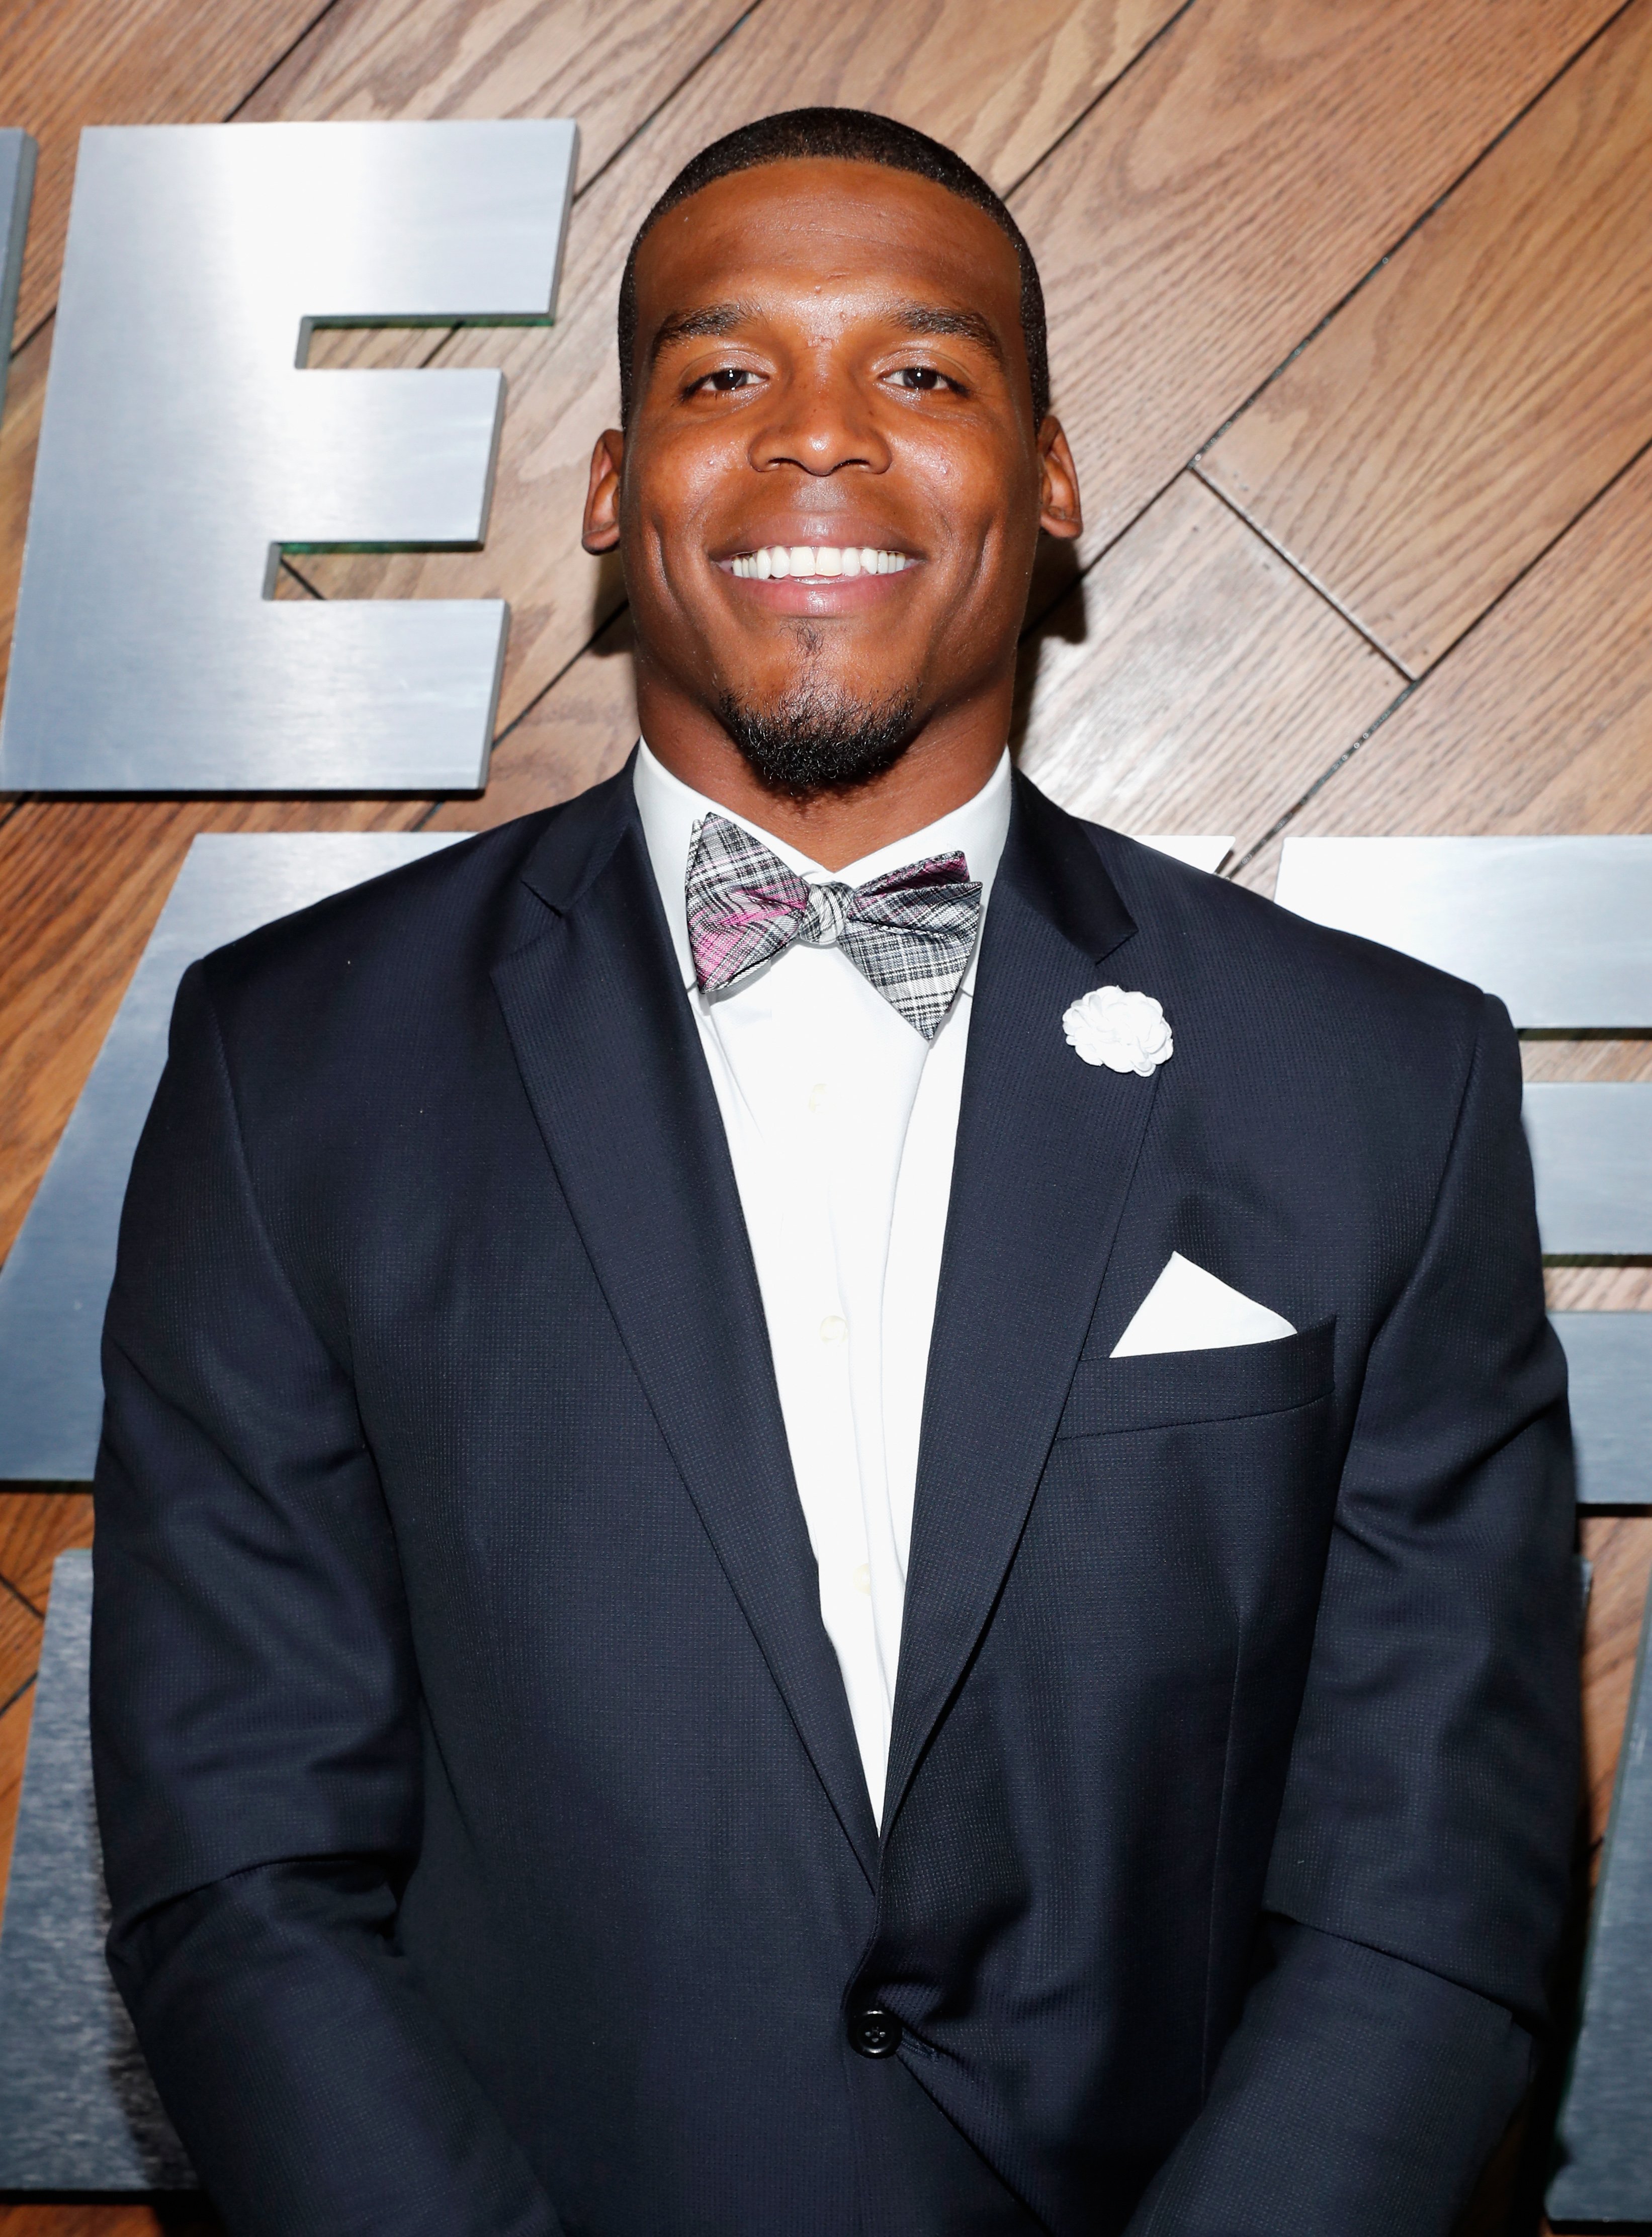 Cam Newton at The Players' Tribune Summer Party in July 2016. | Photo: Getty Images